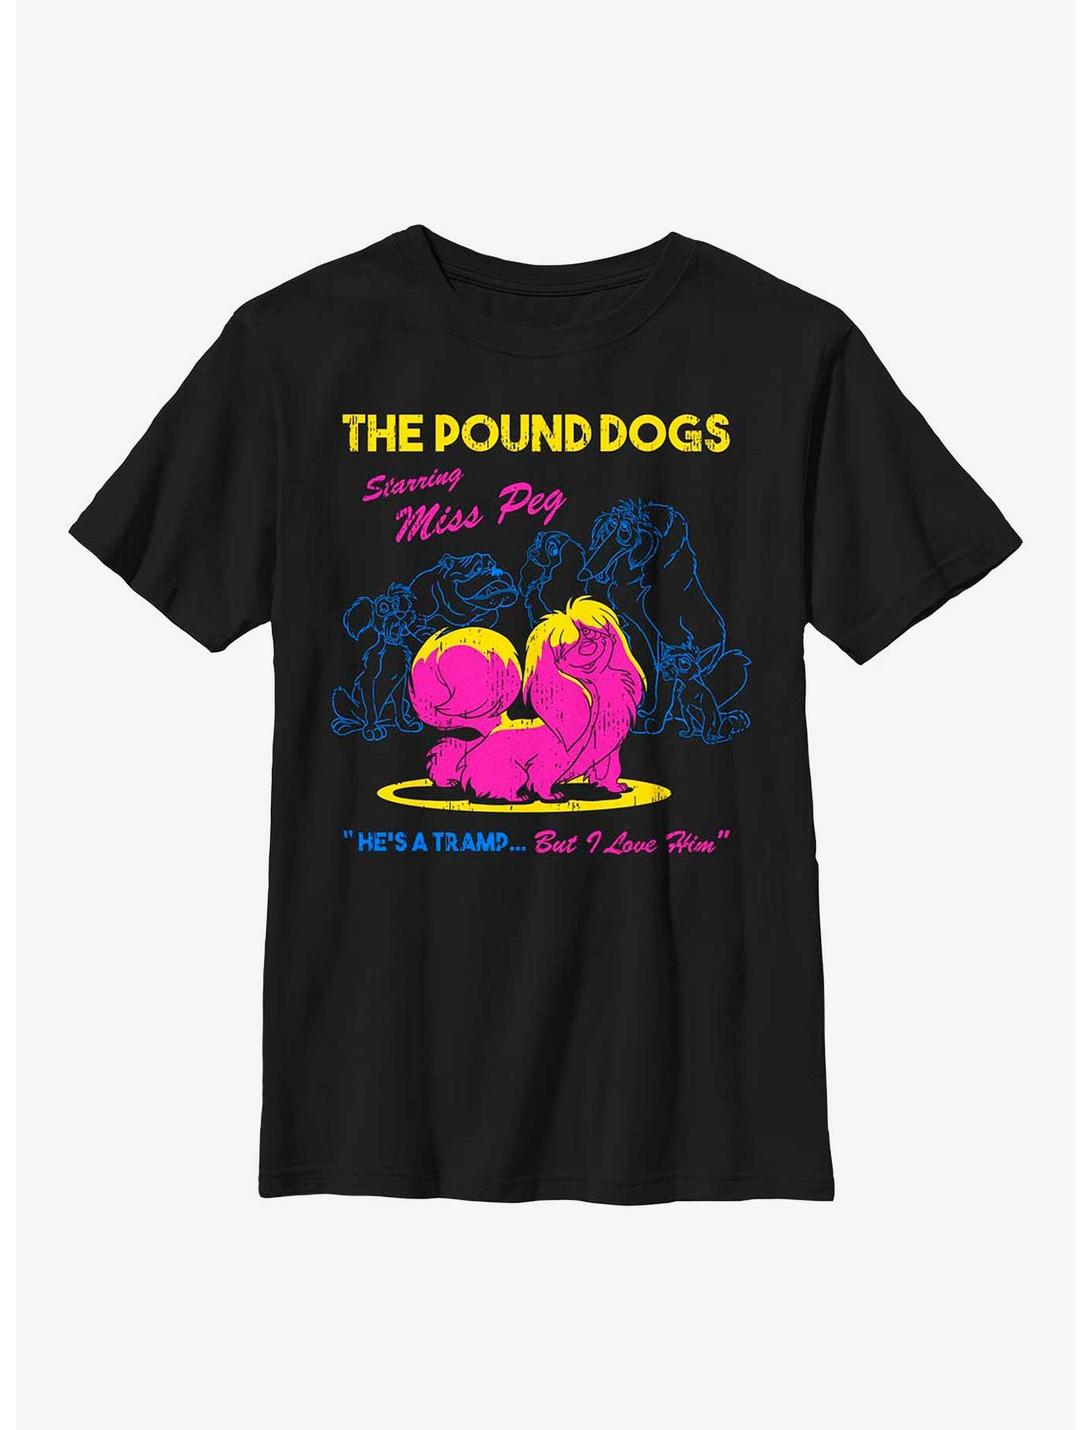 Disney Lady And The Tramp Miss Peg The Pound Dogs Youth T-Shirt, BLACK, hi-res